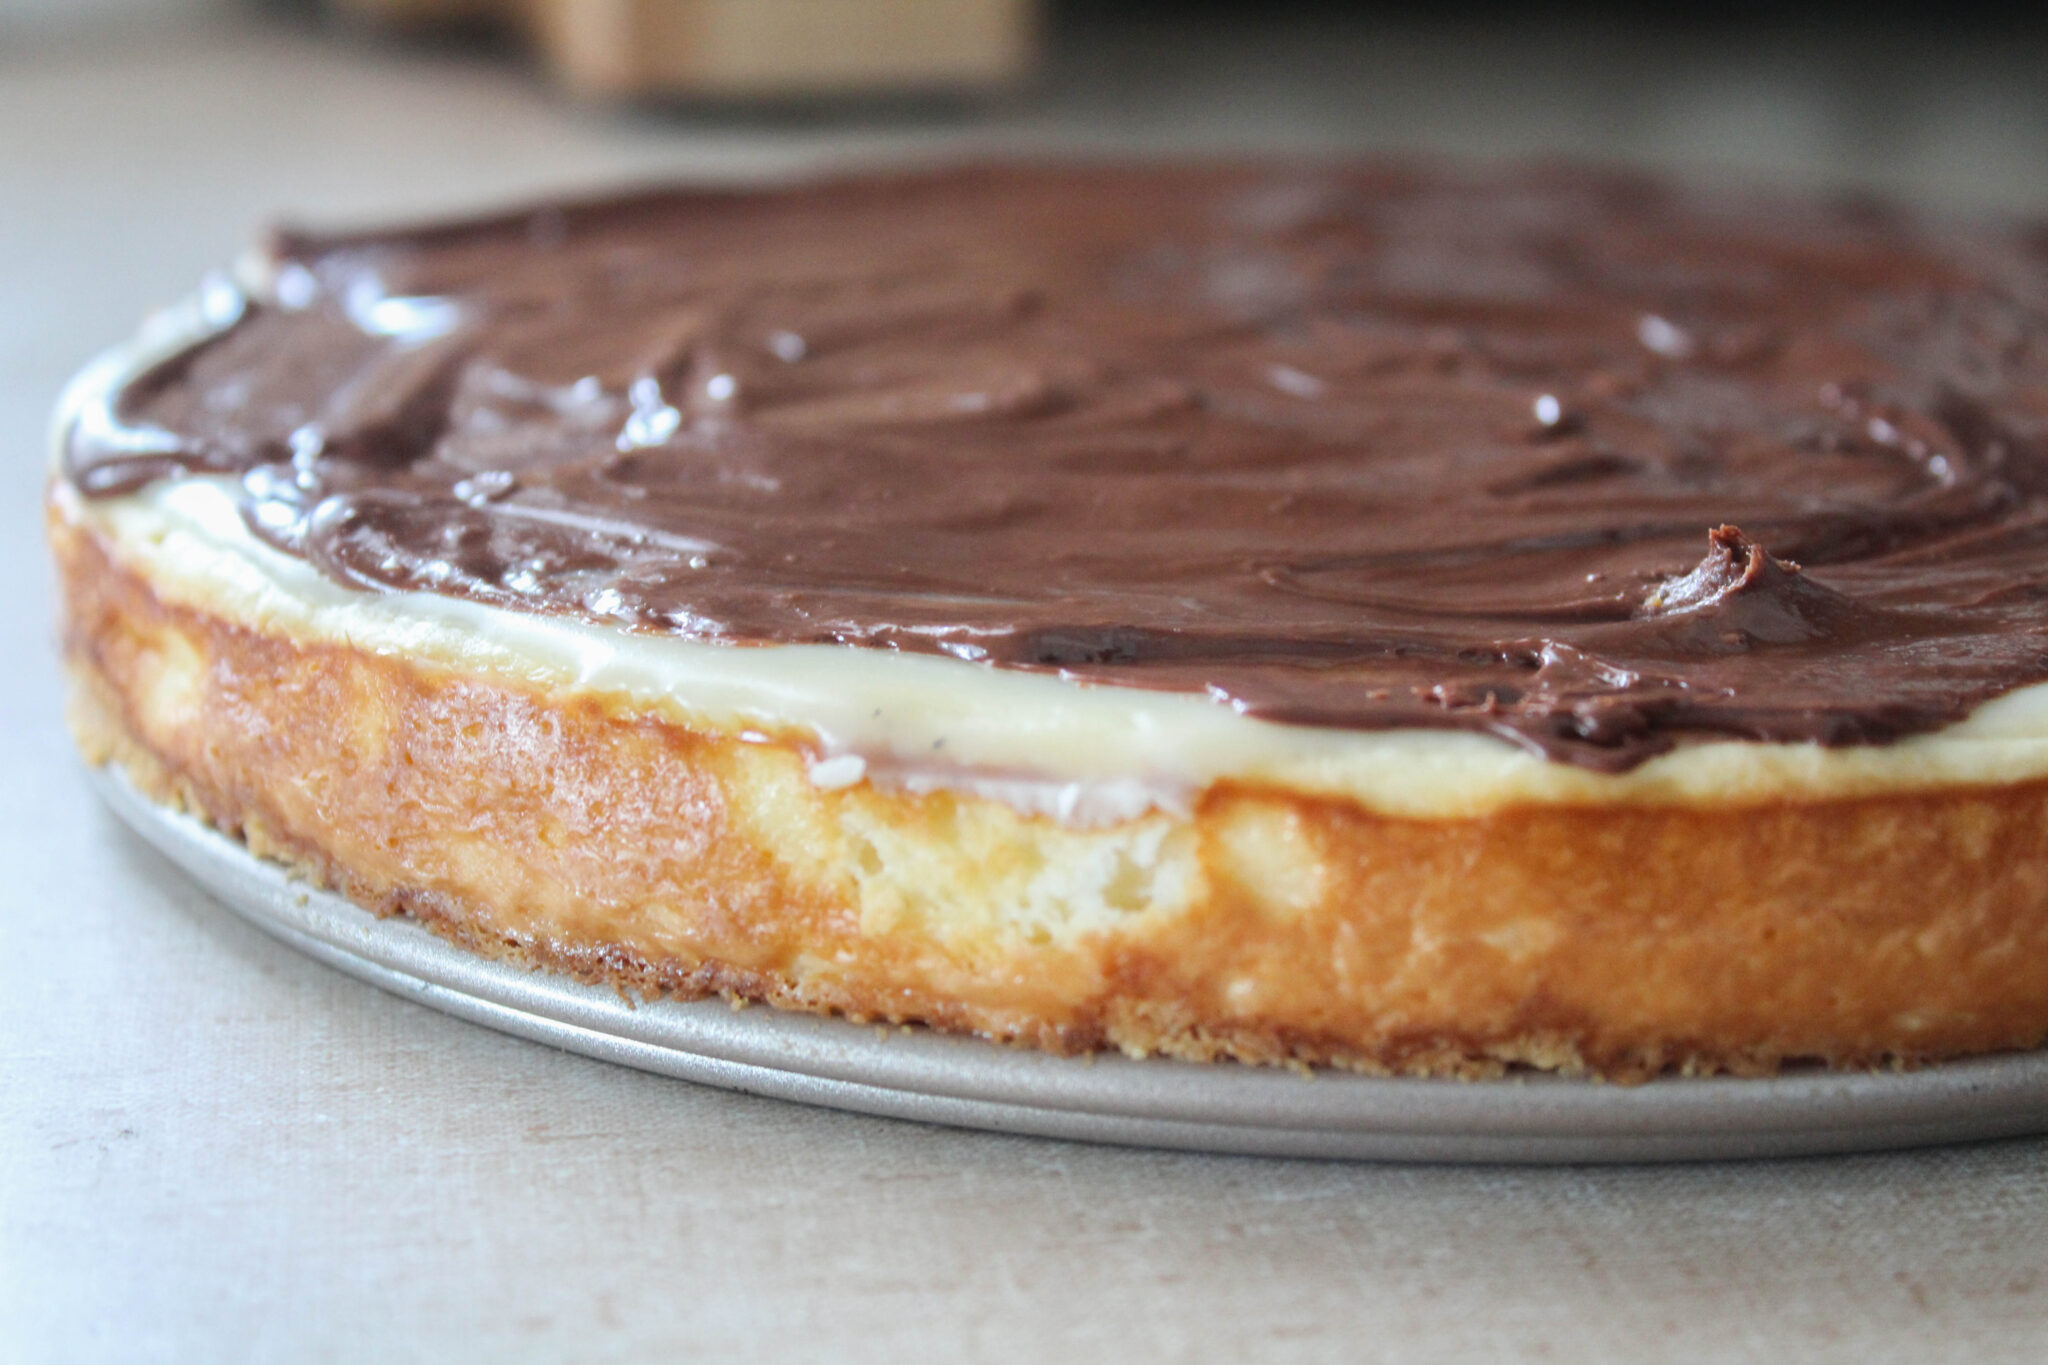 My Twix Cheesecake is like a candy bar in a pan! A smooth filling topped with silky caramel and chocolate. What could be better? 